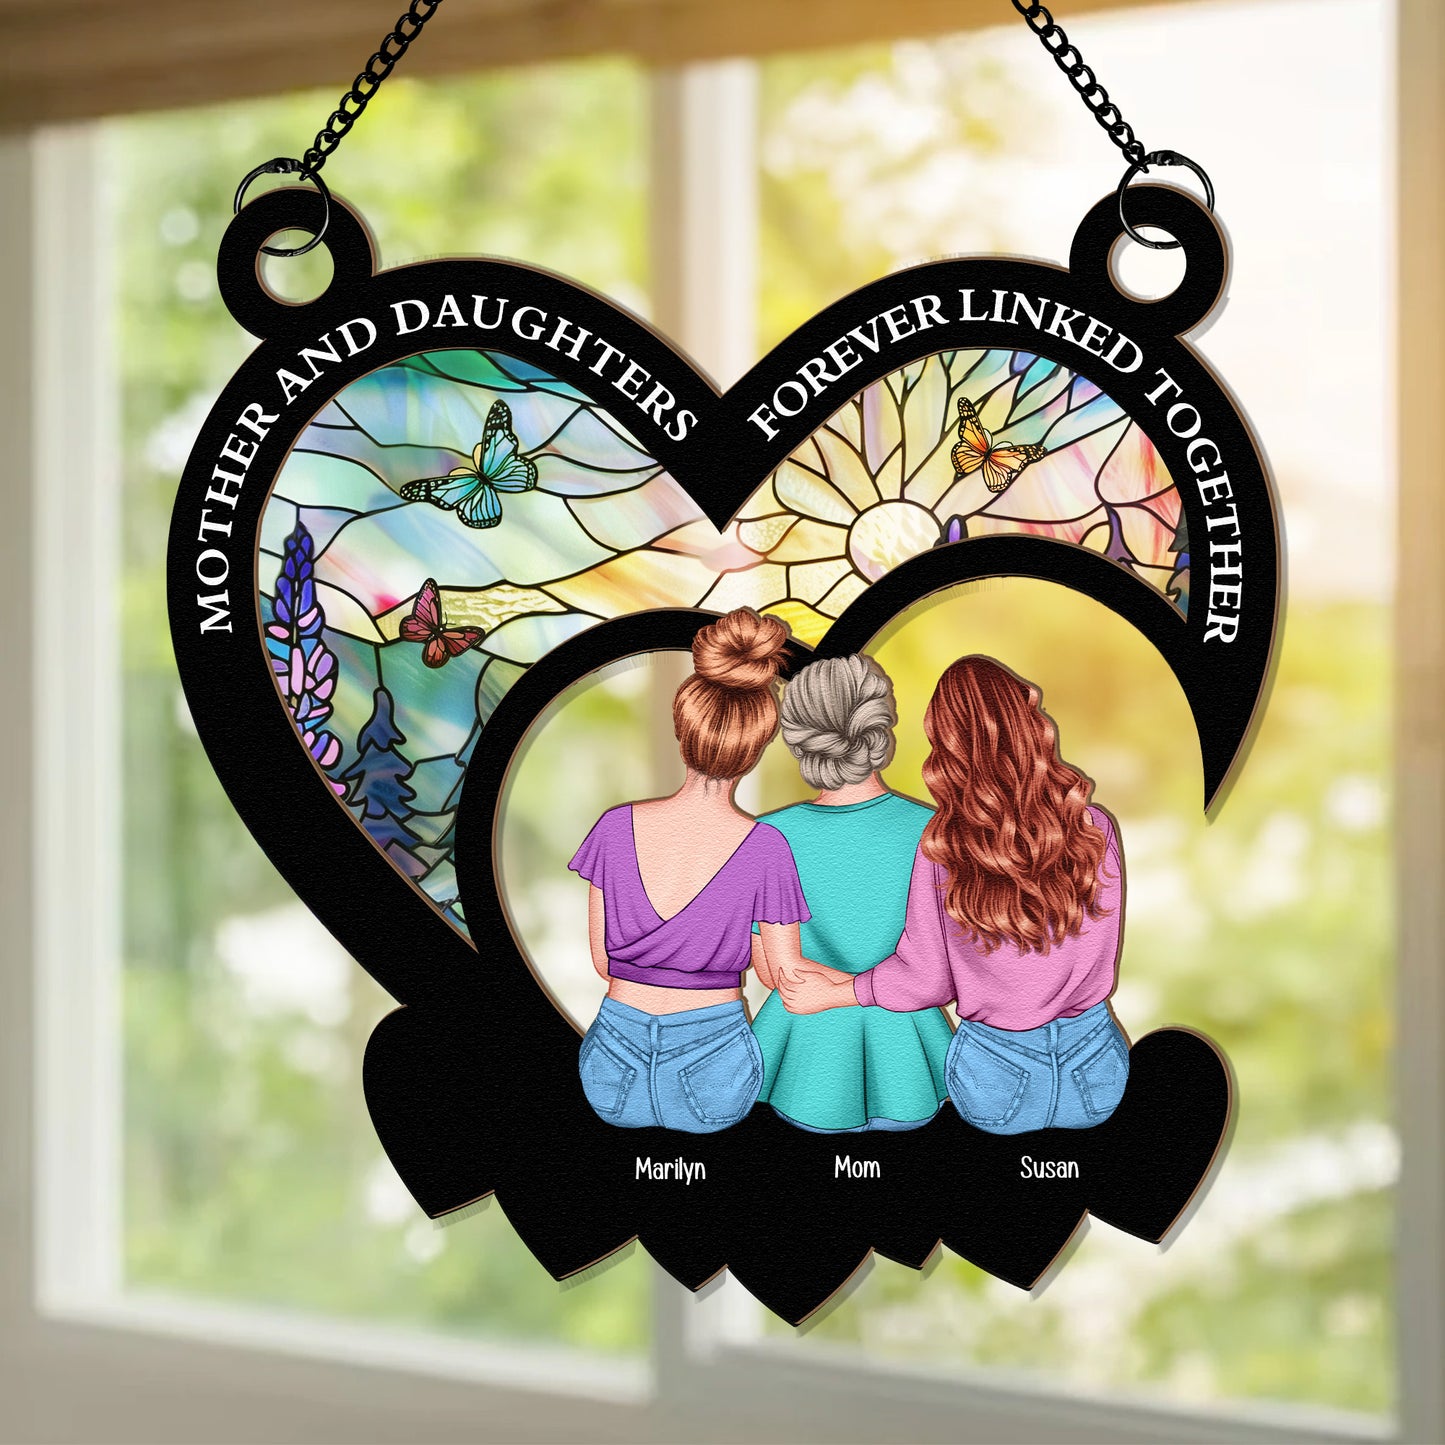 Mother And Daughters Forever Linked Together - Personalized Window Hanging Suncatcher Ornament